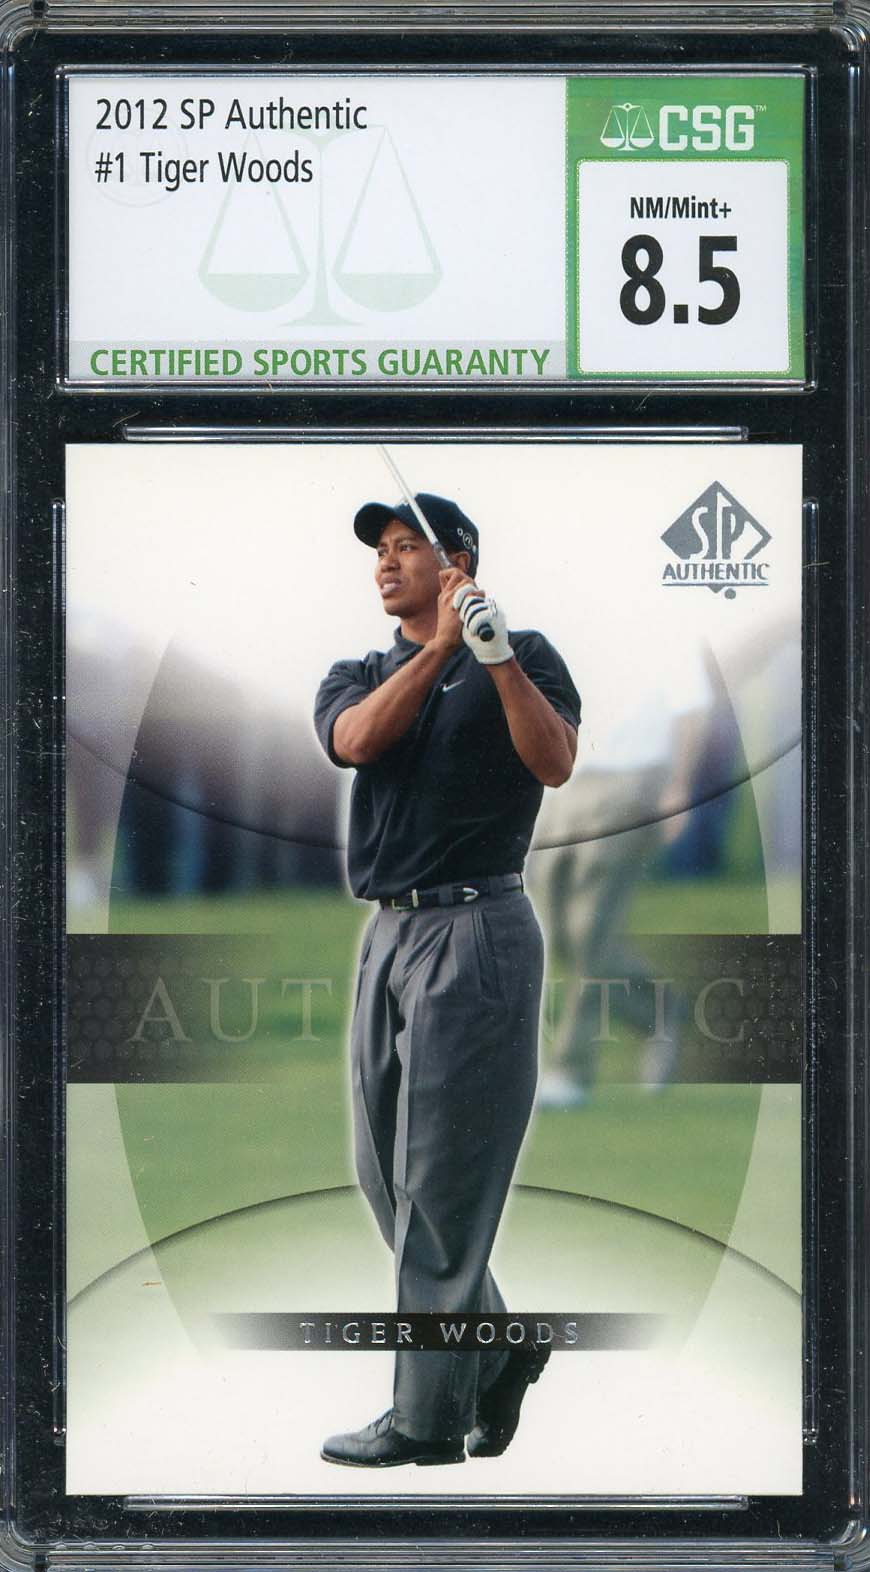 Tiger Woods 2012 SP Authentic Golf Card #1 Graded CSG 8.5-Powers Sports Memorabilia